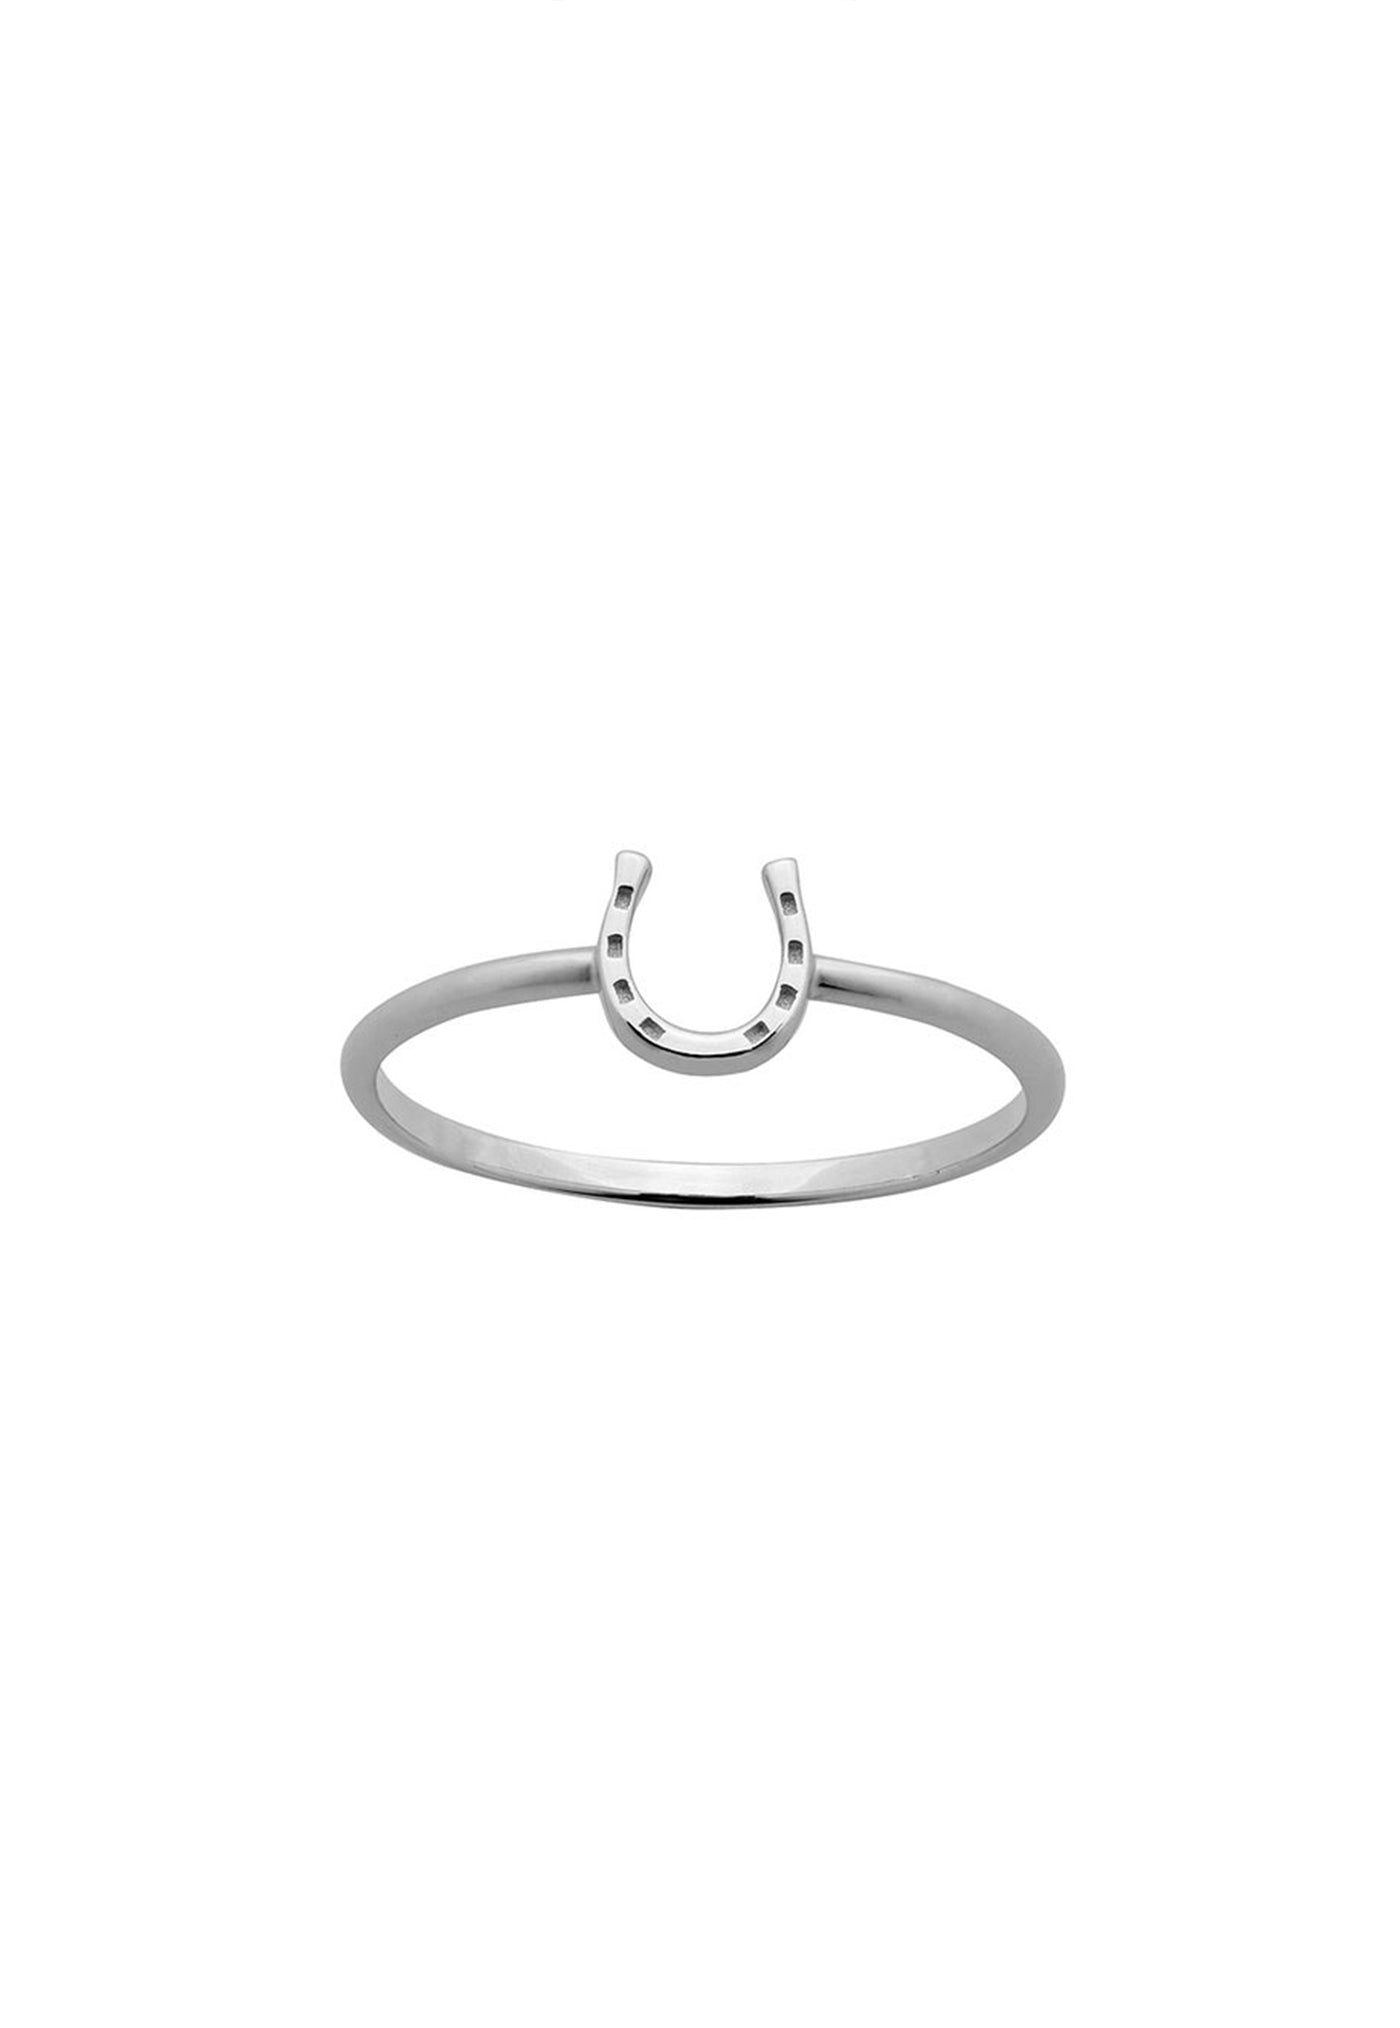 Mini Horseshoe Ring sold by Angel Divine